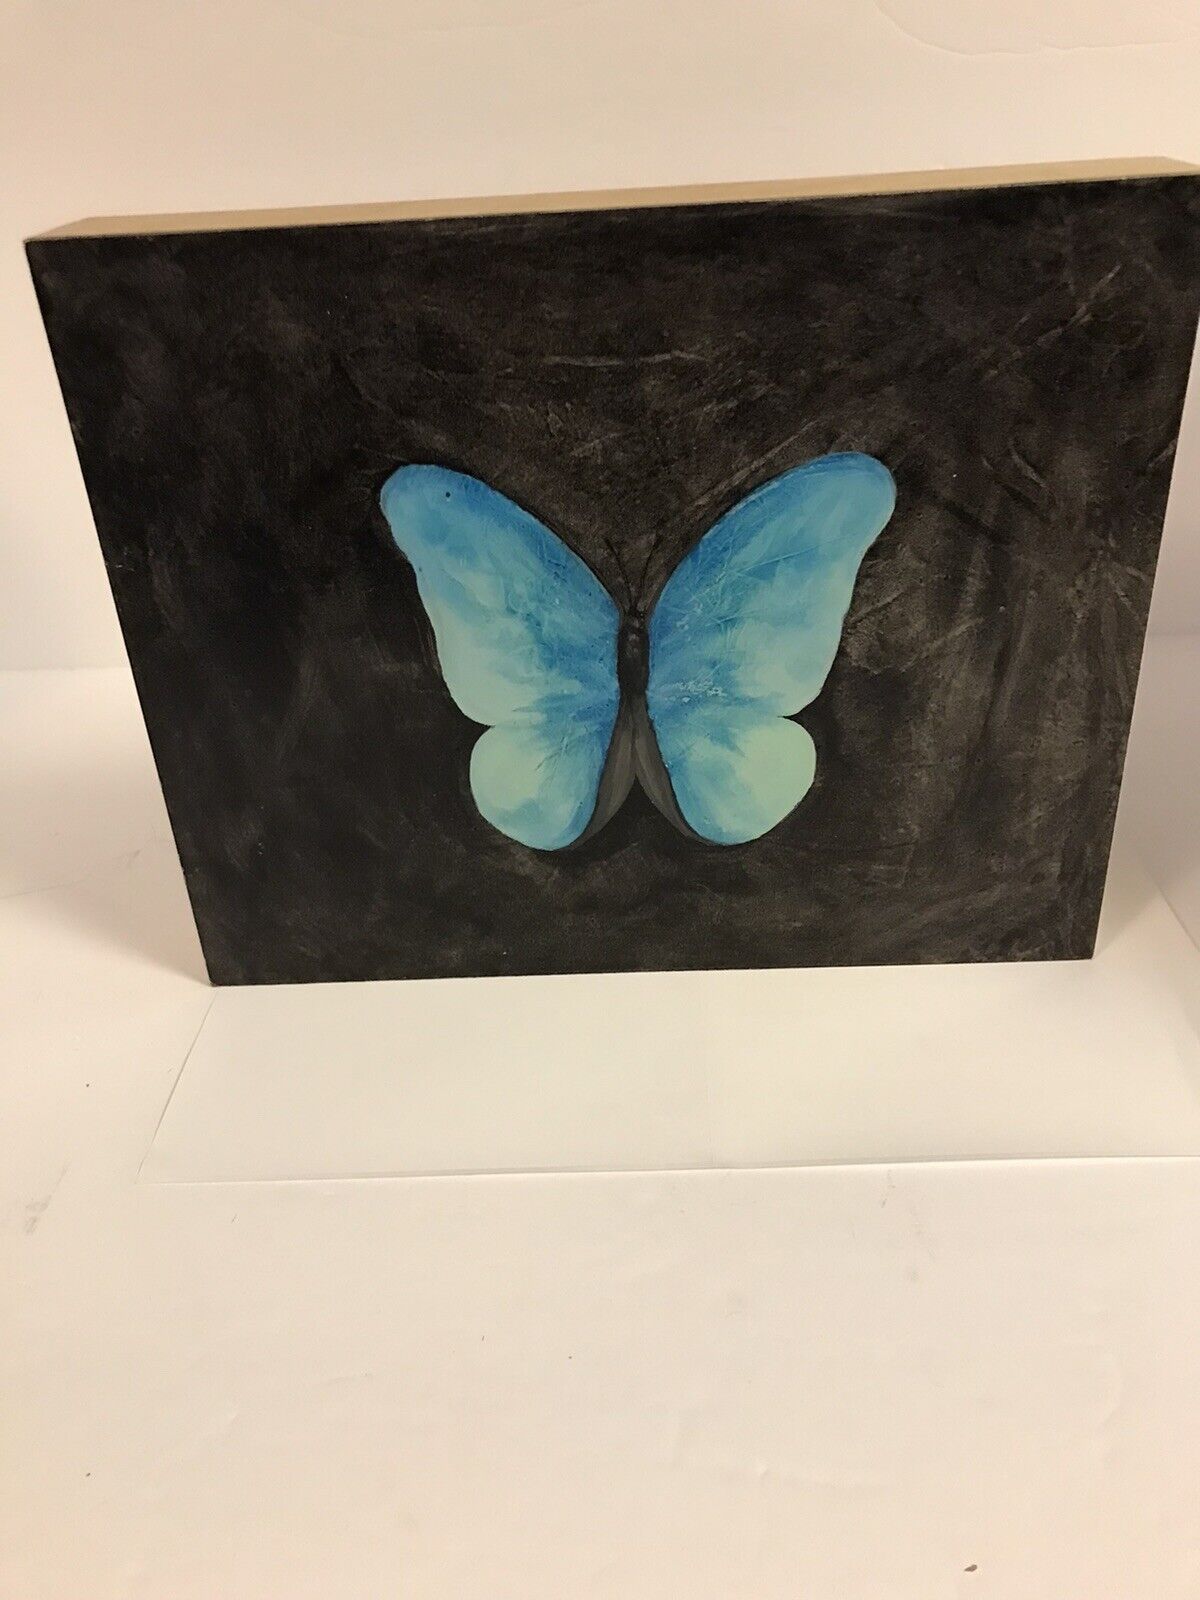 Teal painted butterfly , black background ,signed 8x10 signed 2015 8x10 on gesso